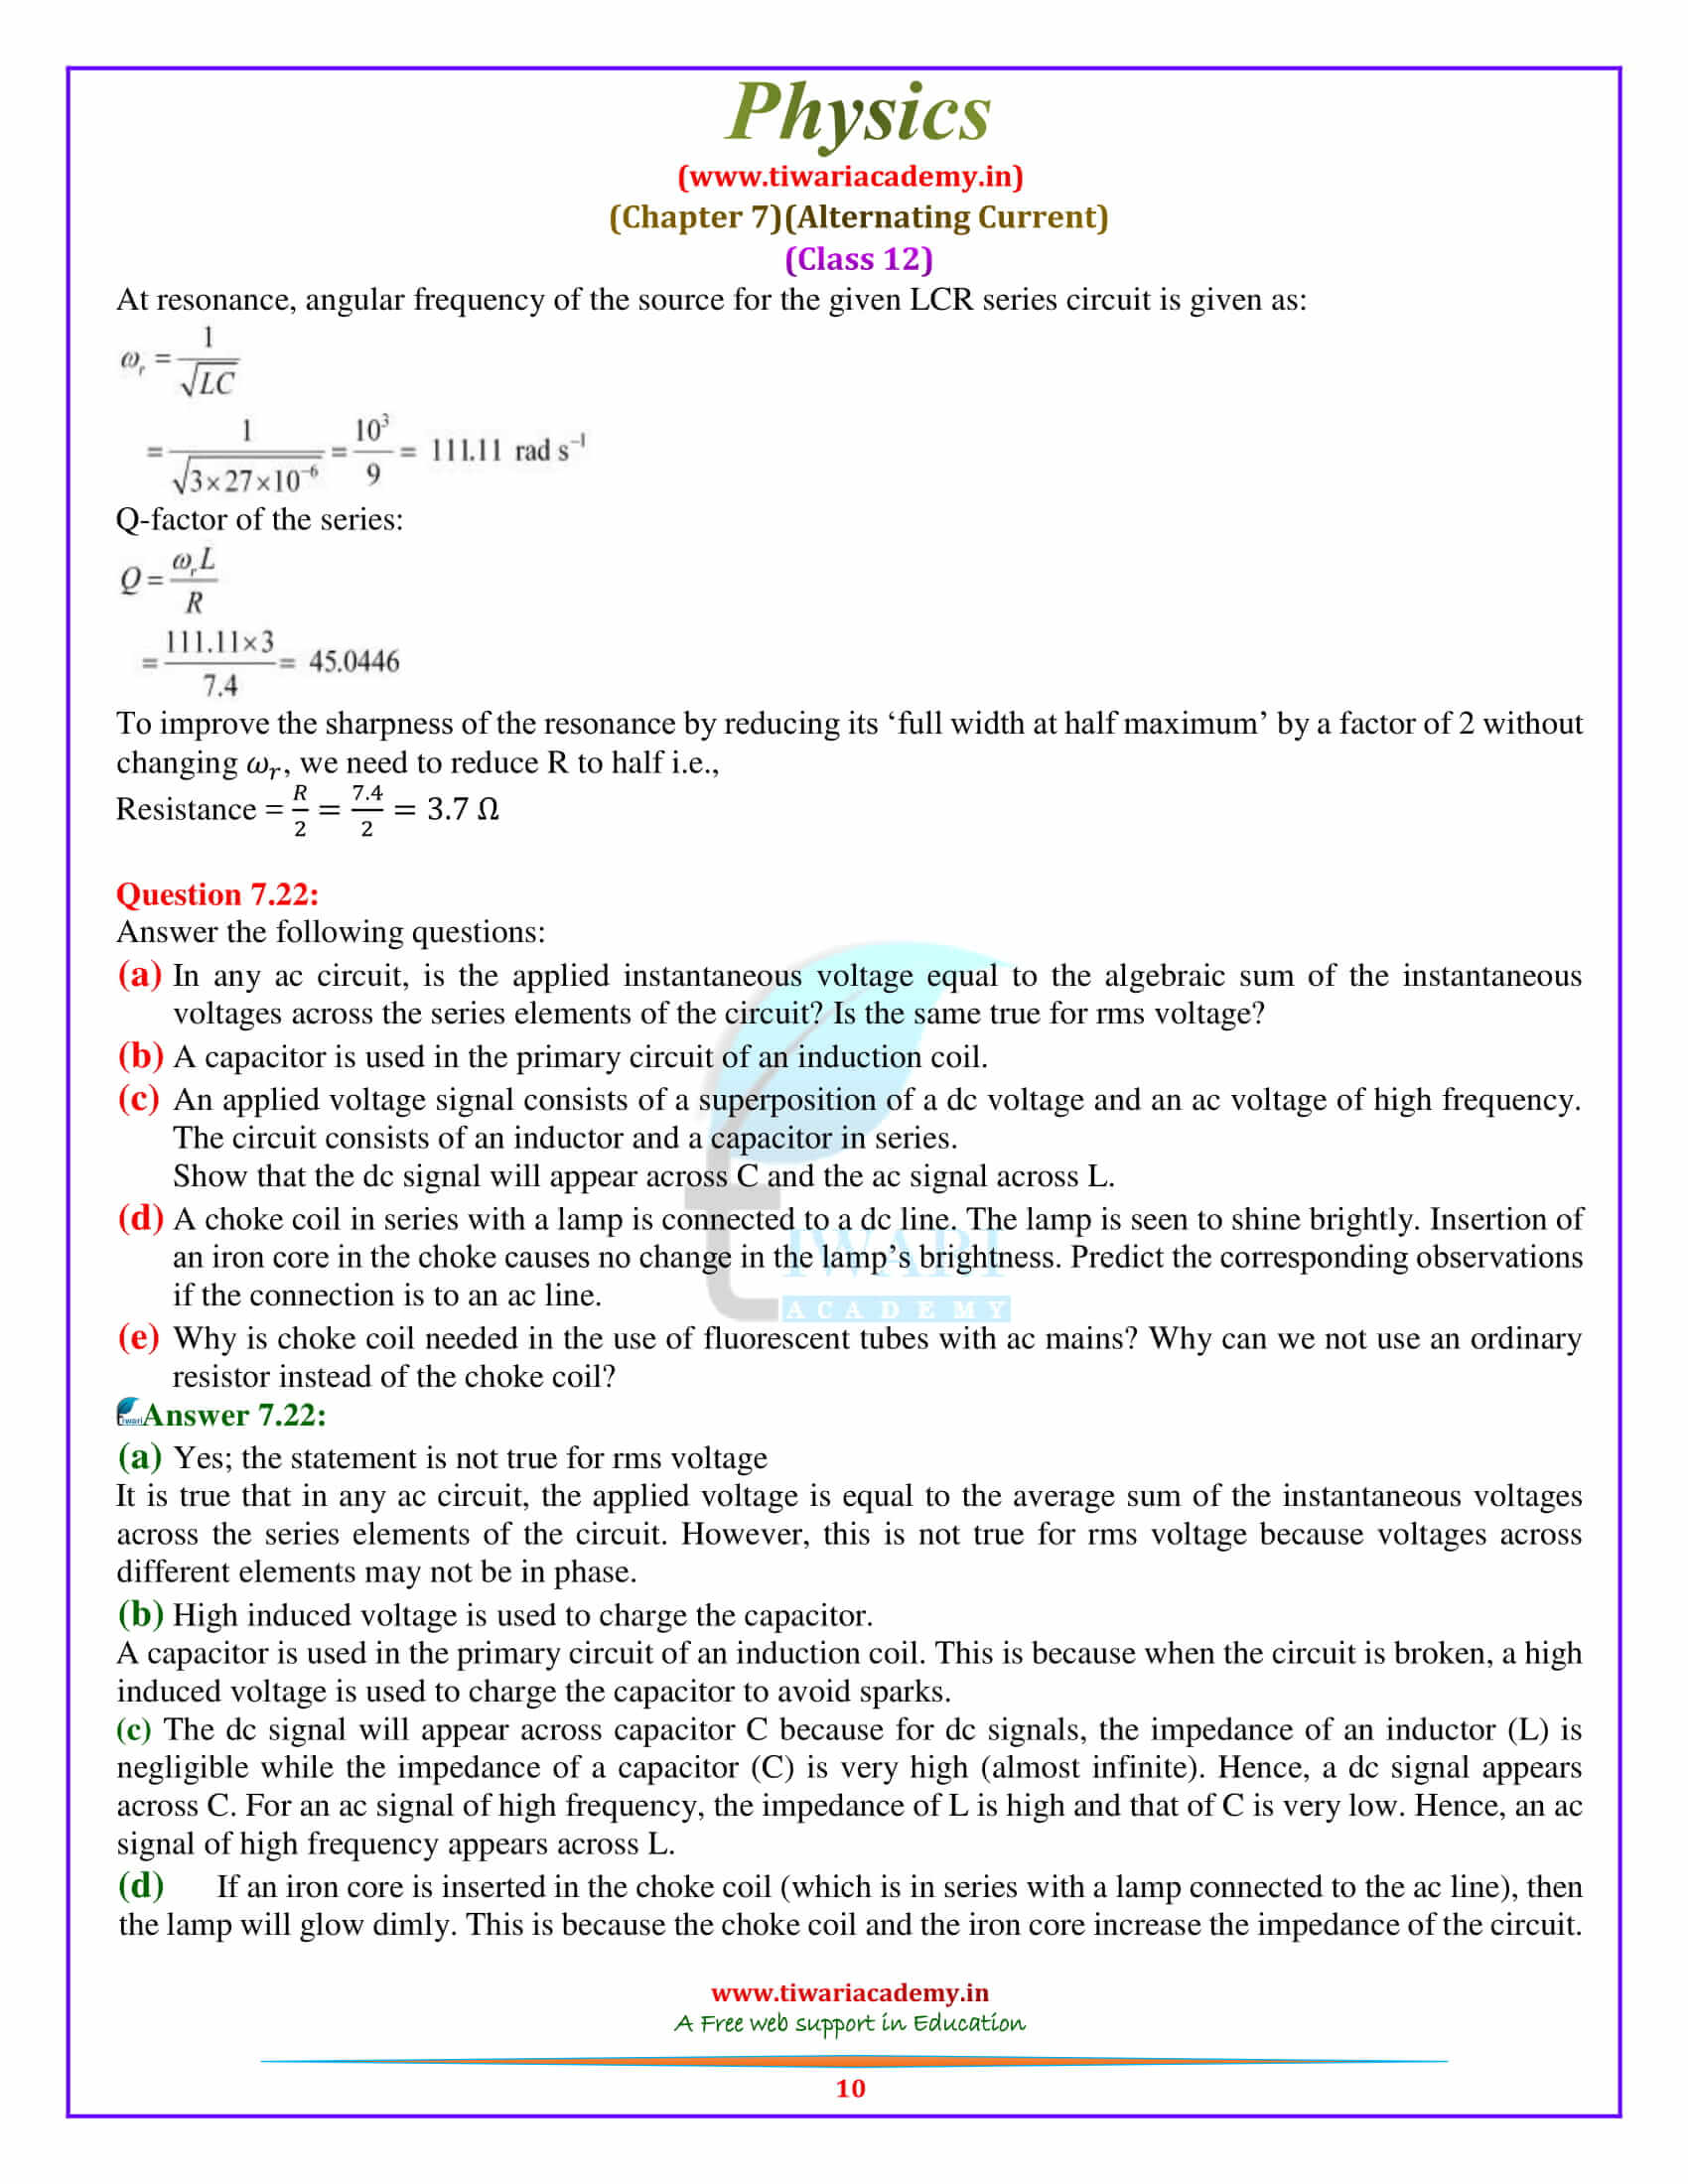 12 Physics Chapter 7 Alternating Current solutions all questions